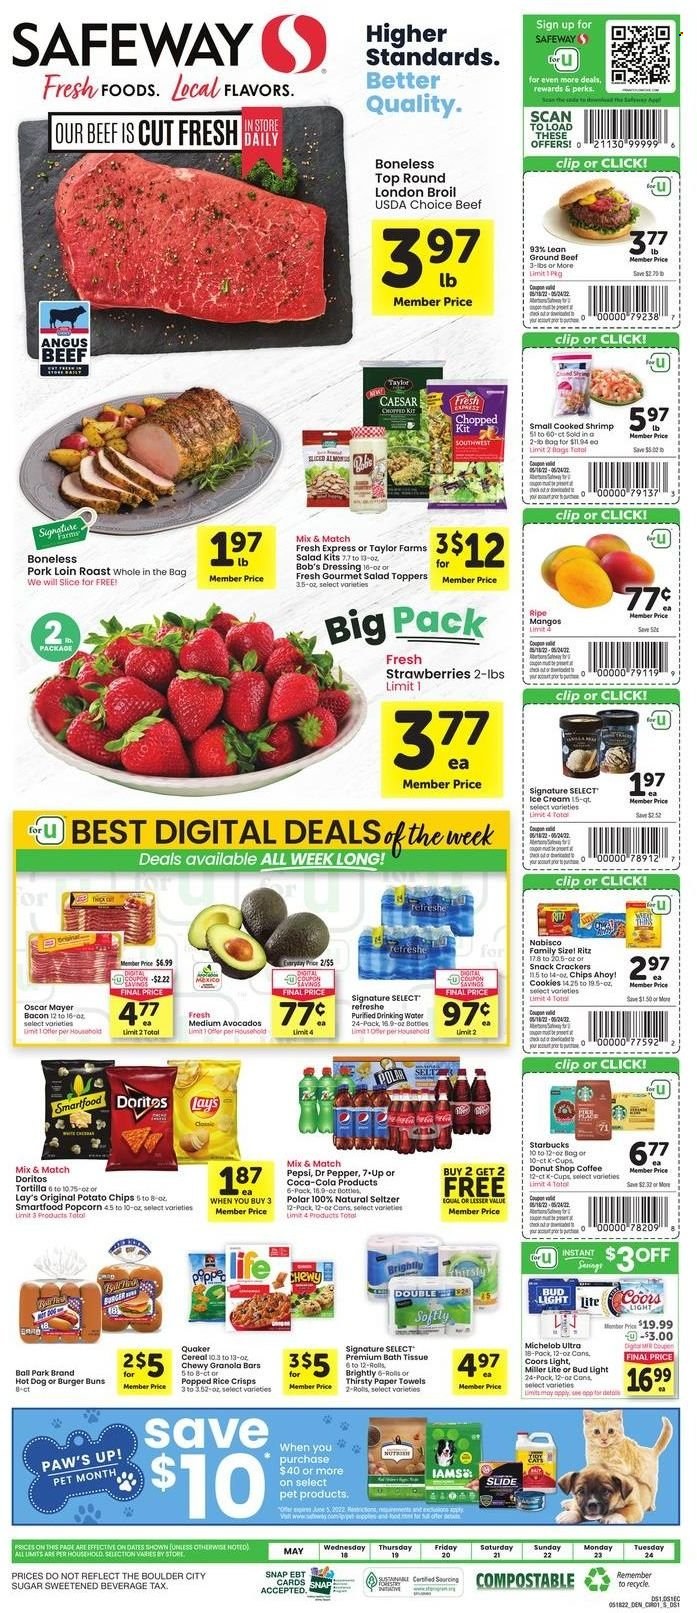 thumbnail - Safeway Flyer - 05/18/2022 - 05/24/2022 - Sales products - tortillas, buns, burger buns, salad, avocado, mango, strawberries, beef meat, ground beef, pork loin, pork meat, shrimps, hot dog, Quaker, bacon, Oscar Mayer, cookies, snack, crackers, Chips Ahoy!, RITZ, Doritos, potato chips, chips, Lay’s, Smartfood, Thins, popcorn, rice crisps, sugar, cereals, granola bar, rice, dressing, Coca-Cola, Pepsi, Dr. Pepper, 7UP, seltzer water, coffee, Starbucks, coffee capsules, K-Cups, beer, Bud Light, bath tissue, kitchen towels, paper towels, Miller Lite, Coors, Michelob. Page 1.